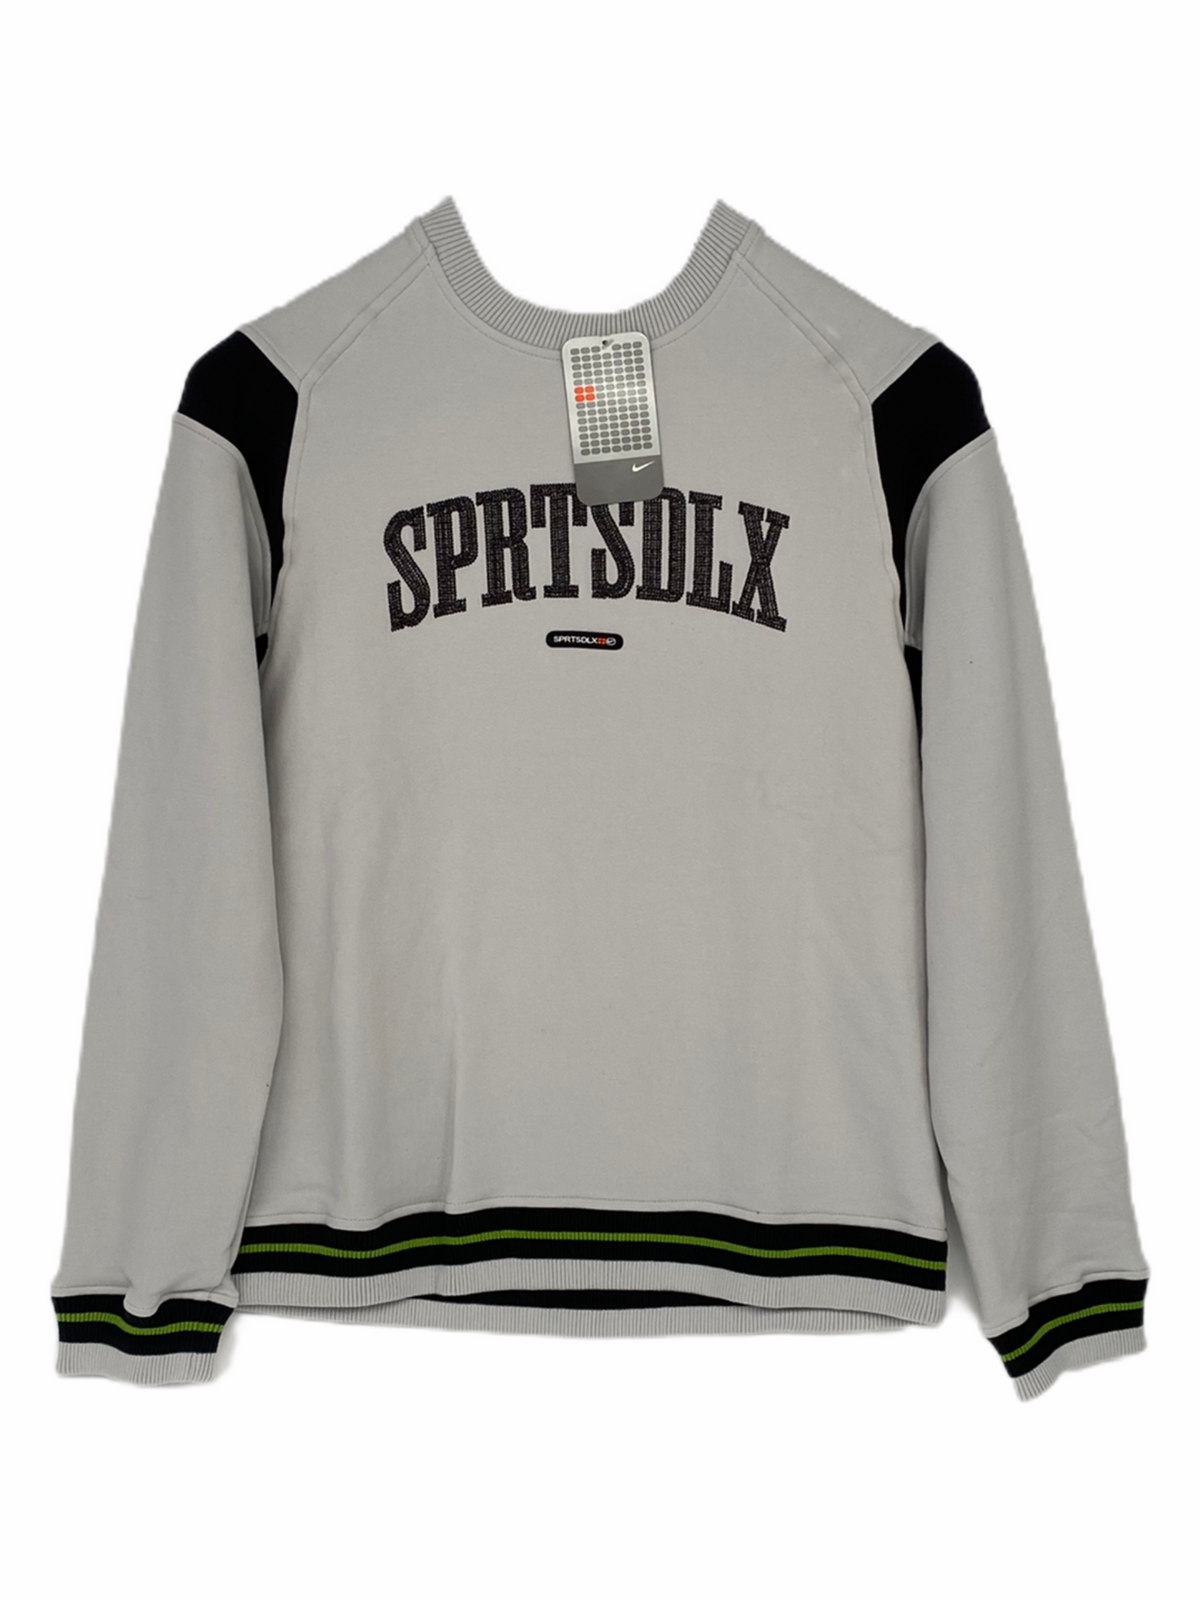 Vintage Nike sports DLX crew neck sweater - Not In Your Wardrobe™ - [Vendor]